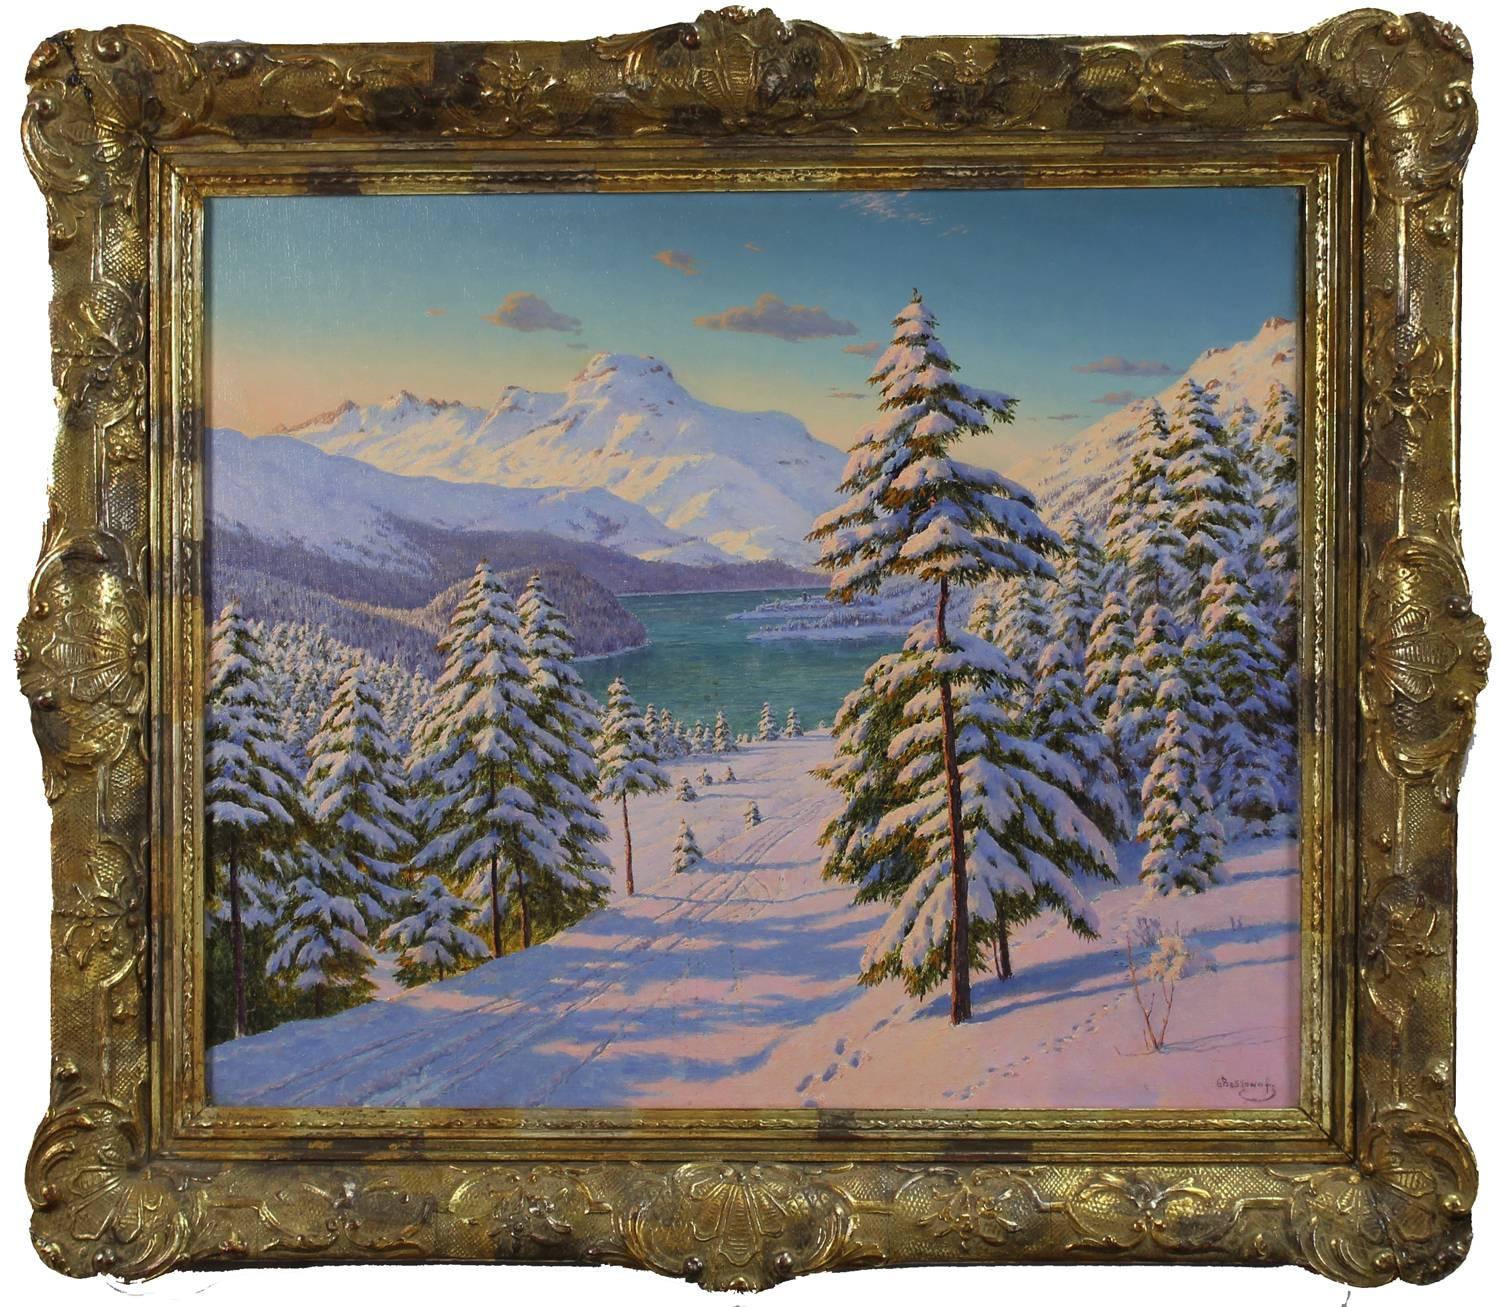 Winter Landscape with a Lake - Painting by Boris Bessonof